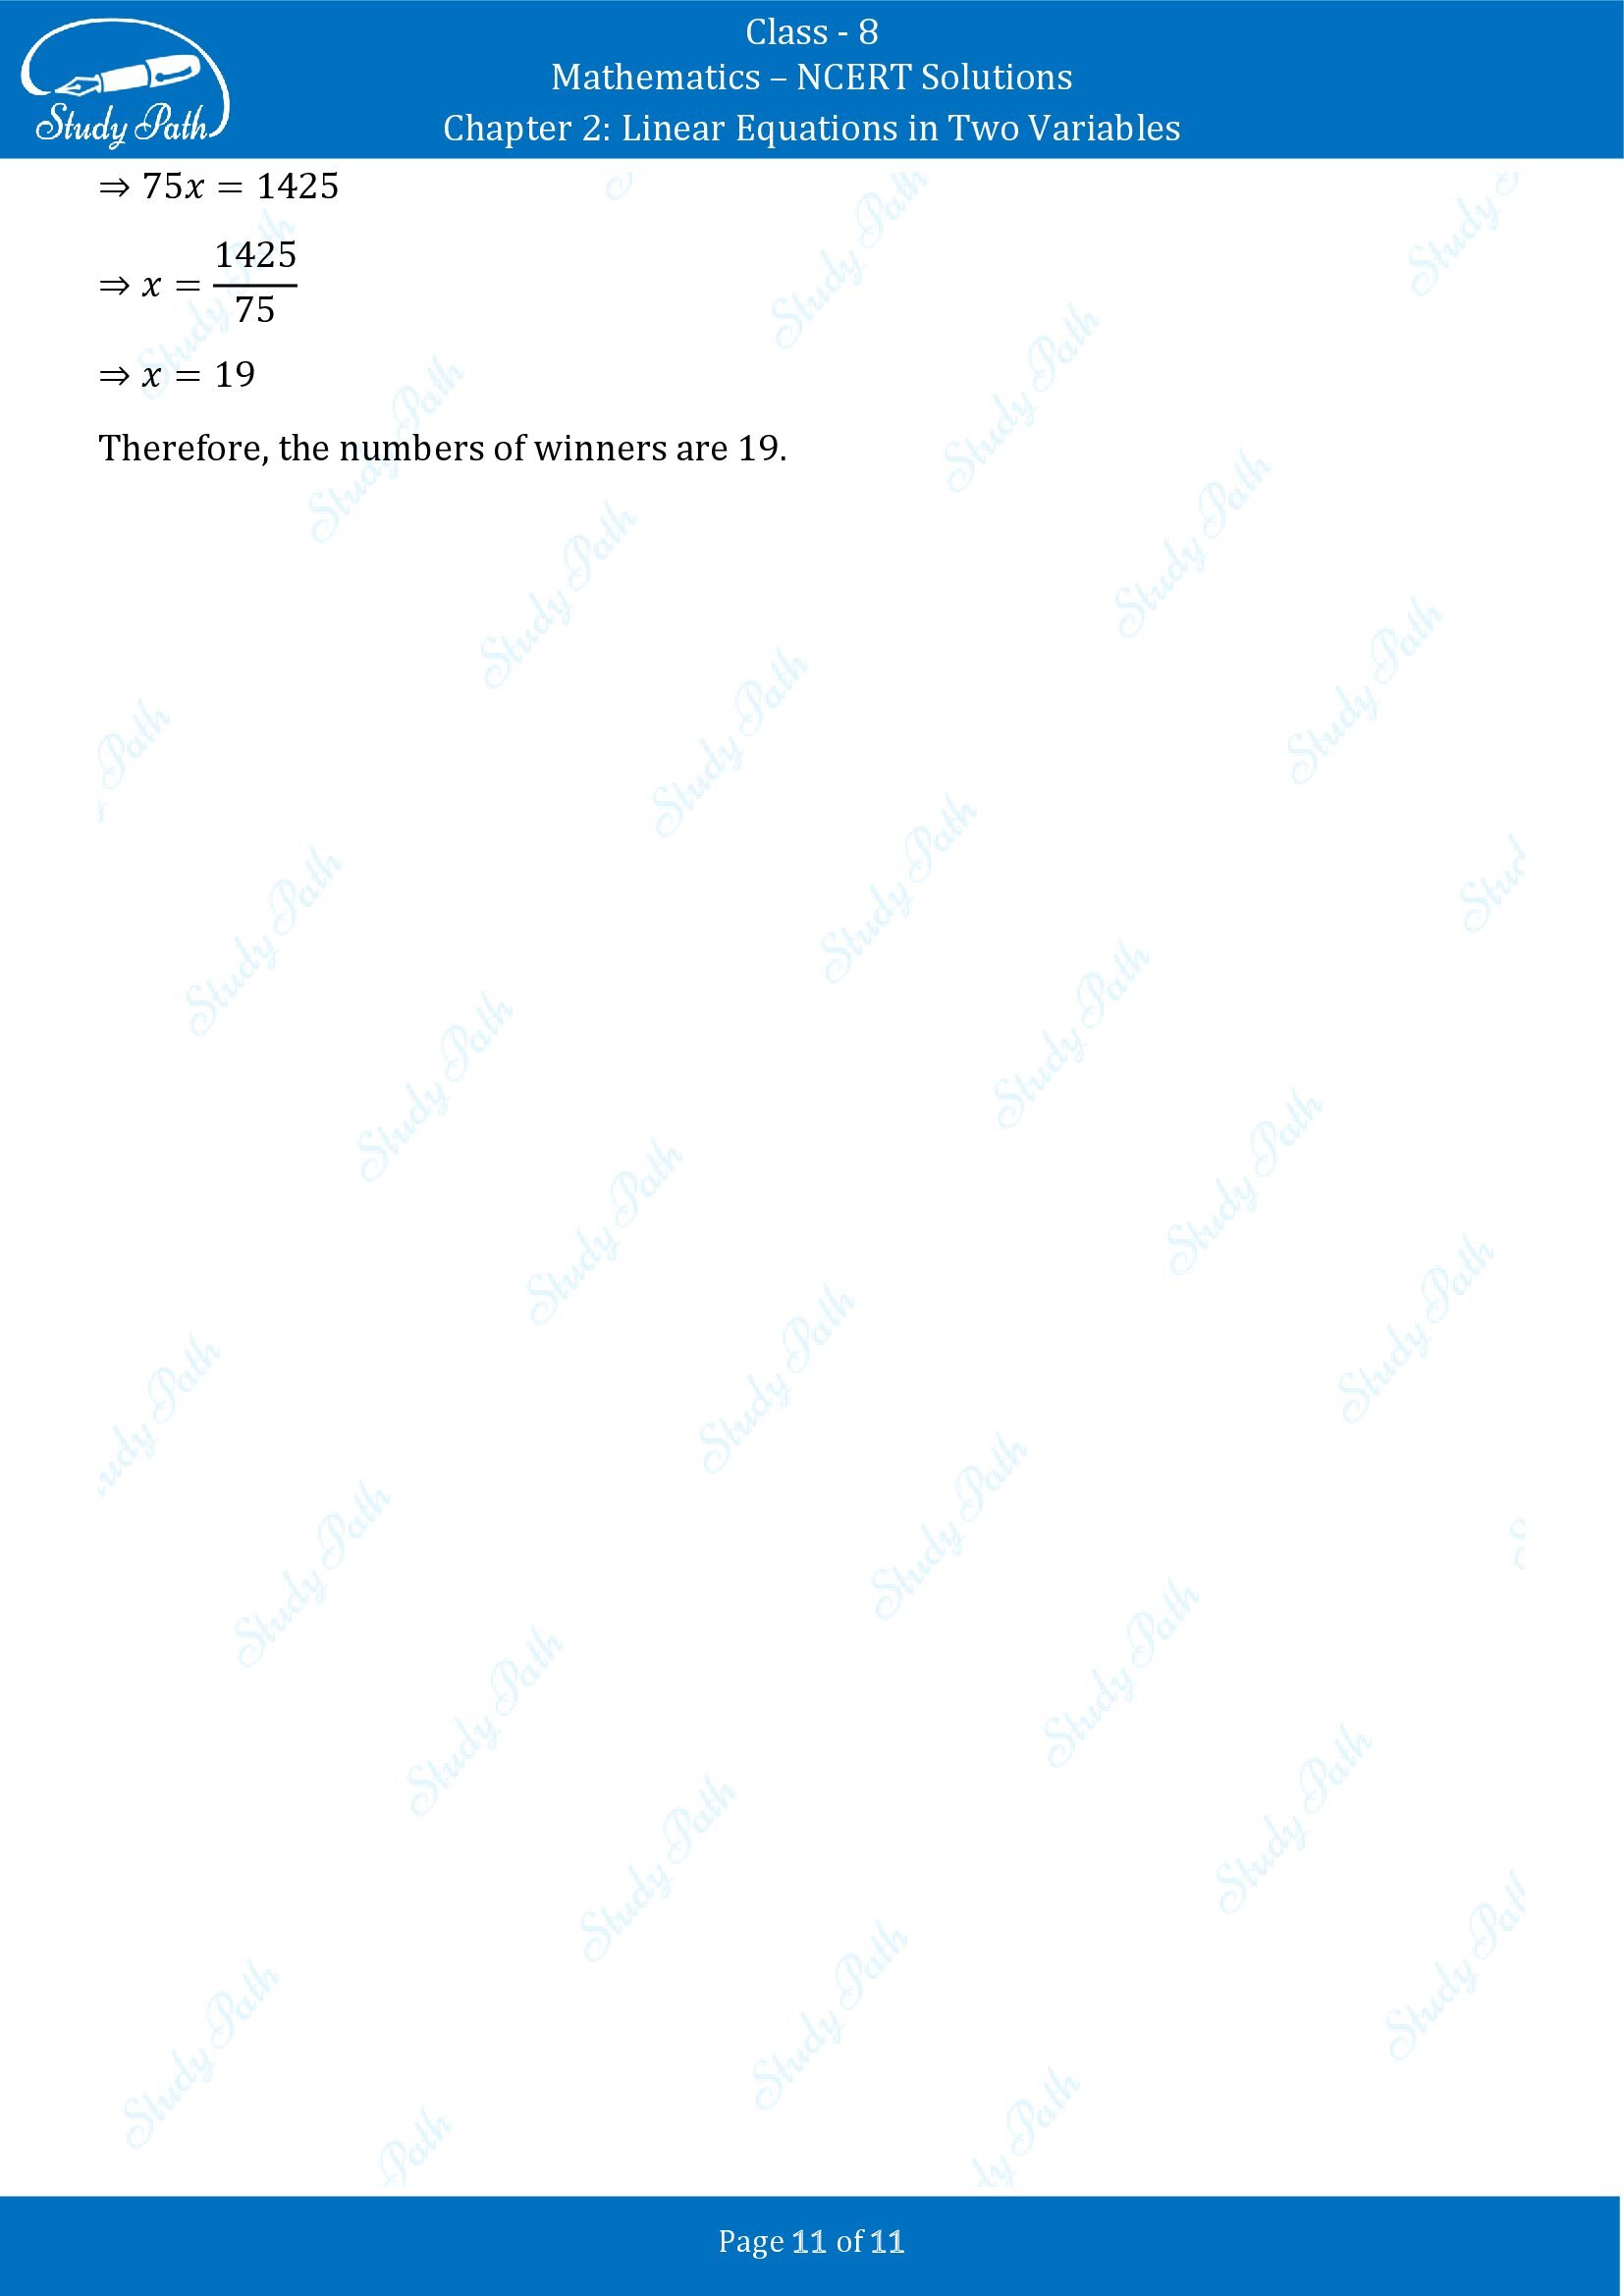 NCERT Solutions for Class 8 Maths Chapter 2 Linear Equations in Two Variables Exercise 2.2 00011